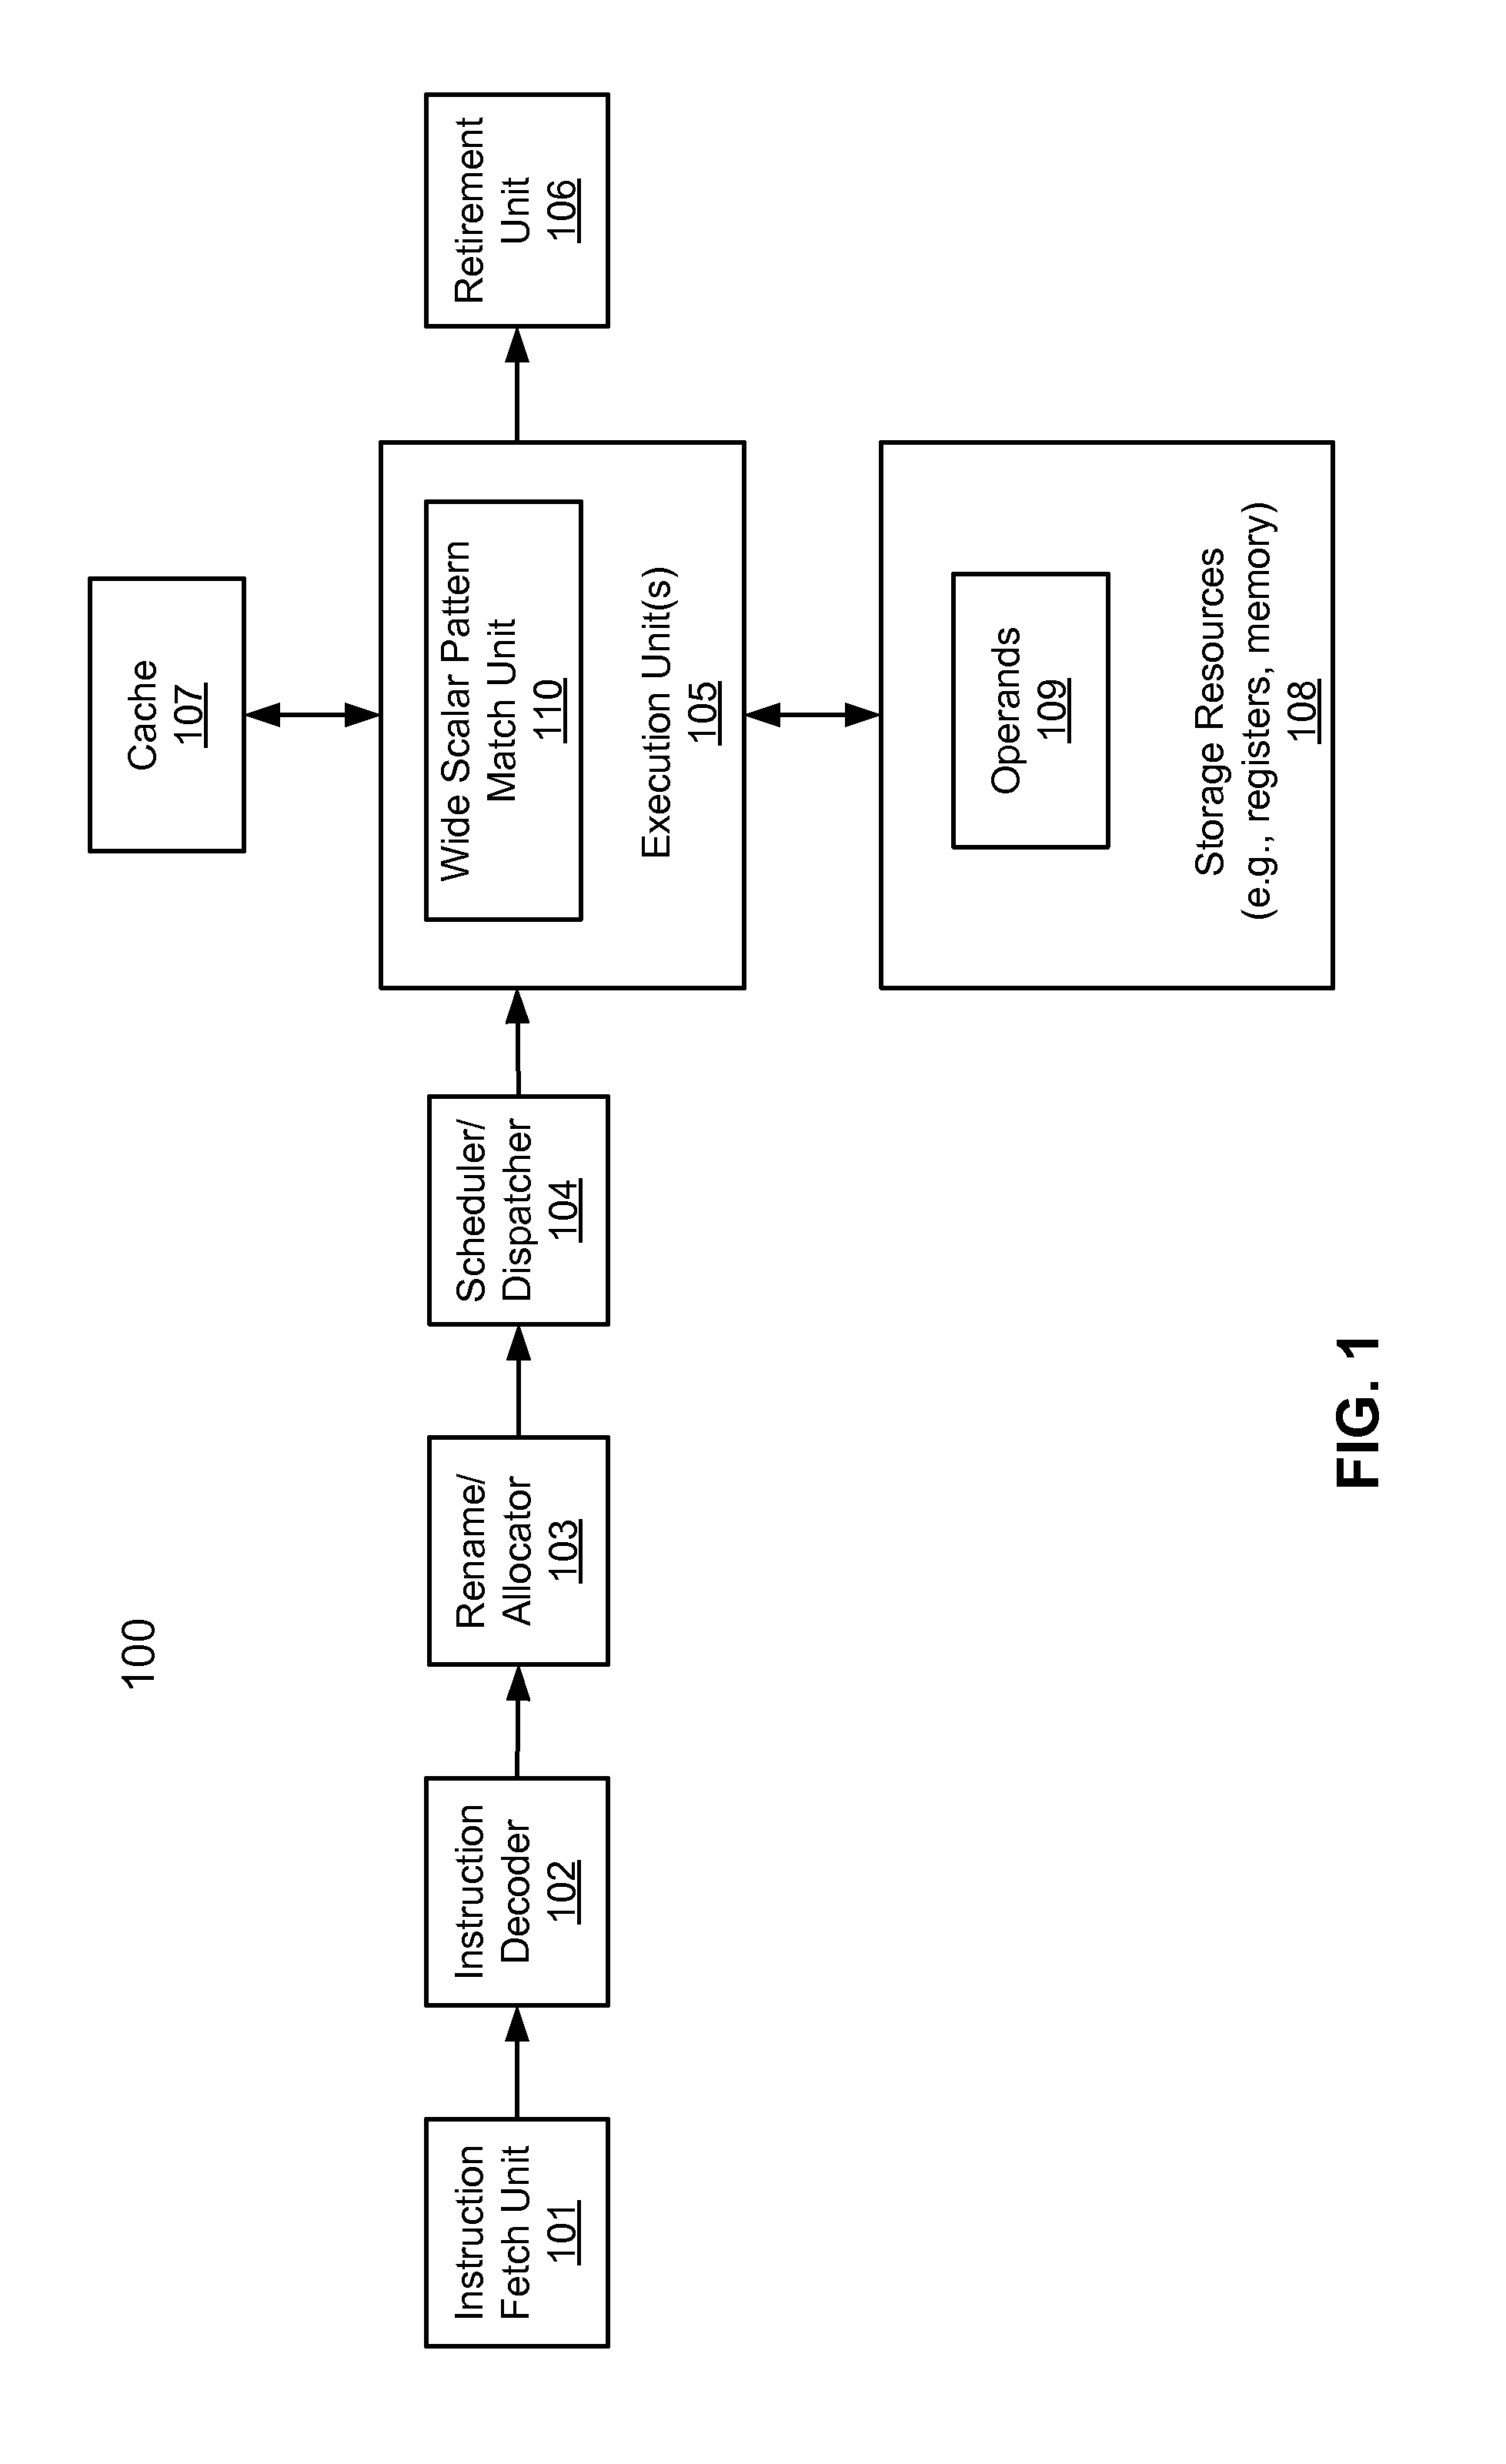 Instruction set for supporting wide scalar pattern matches